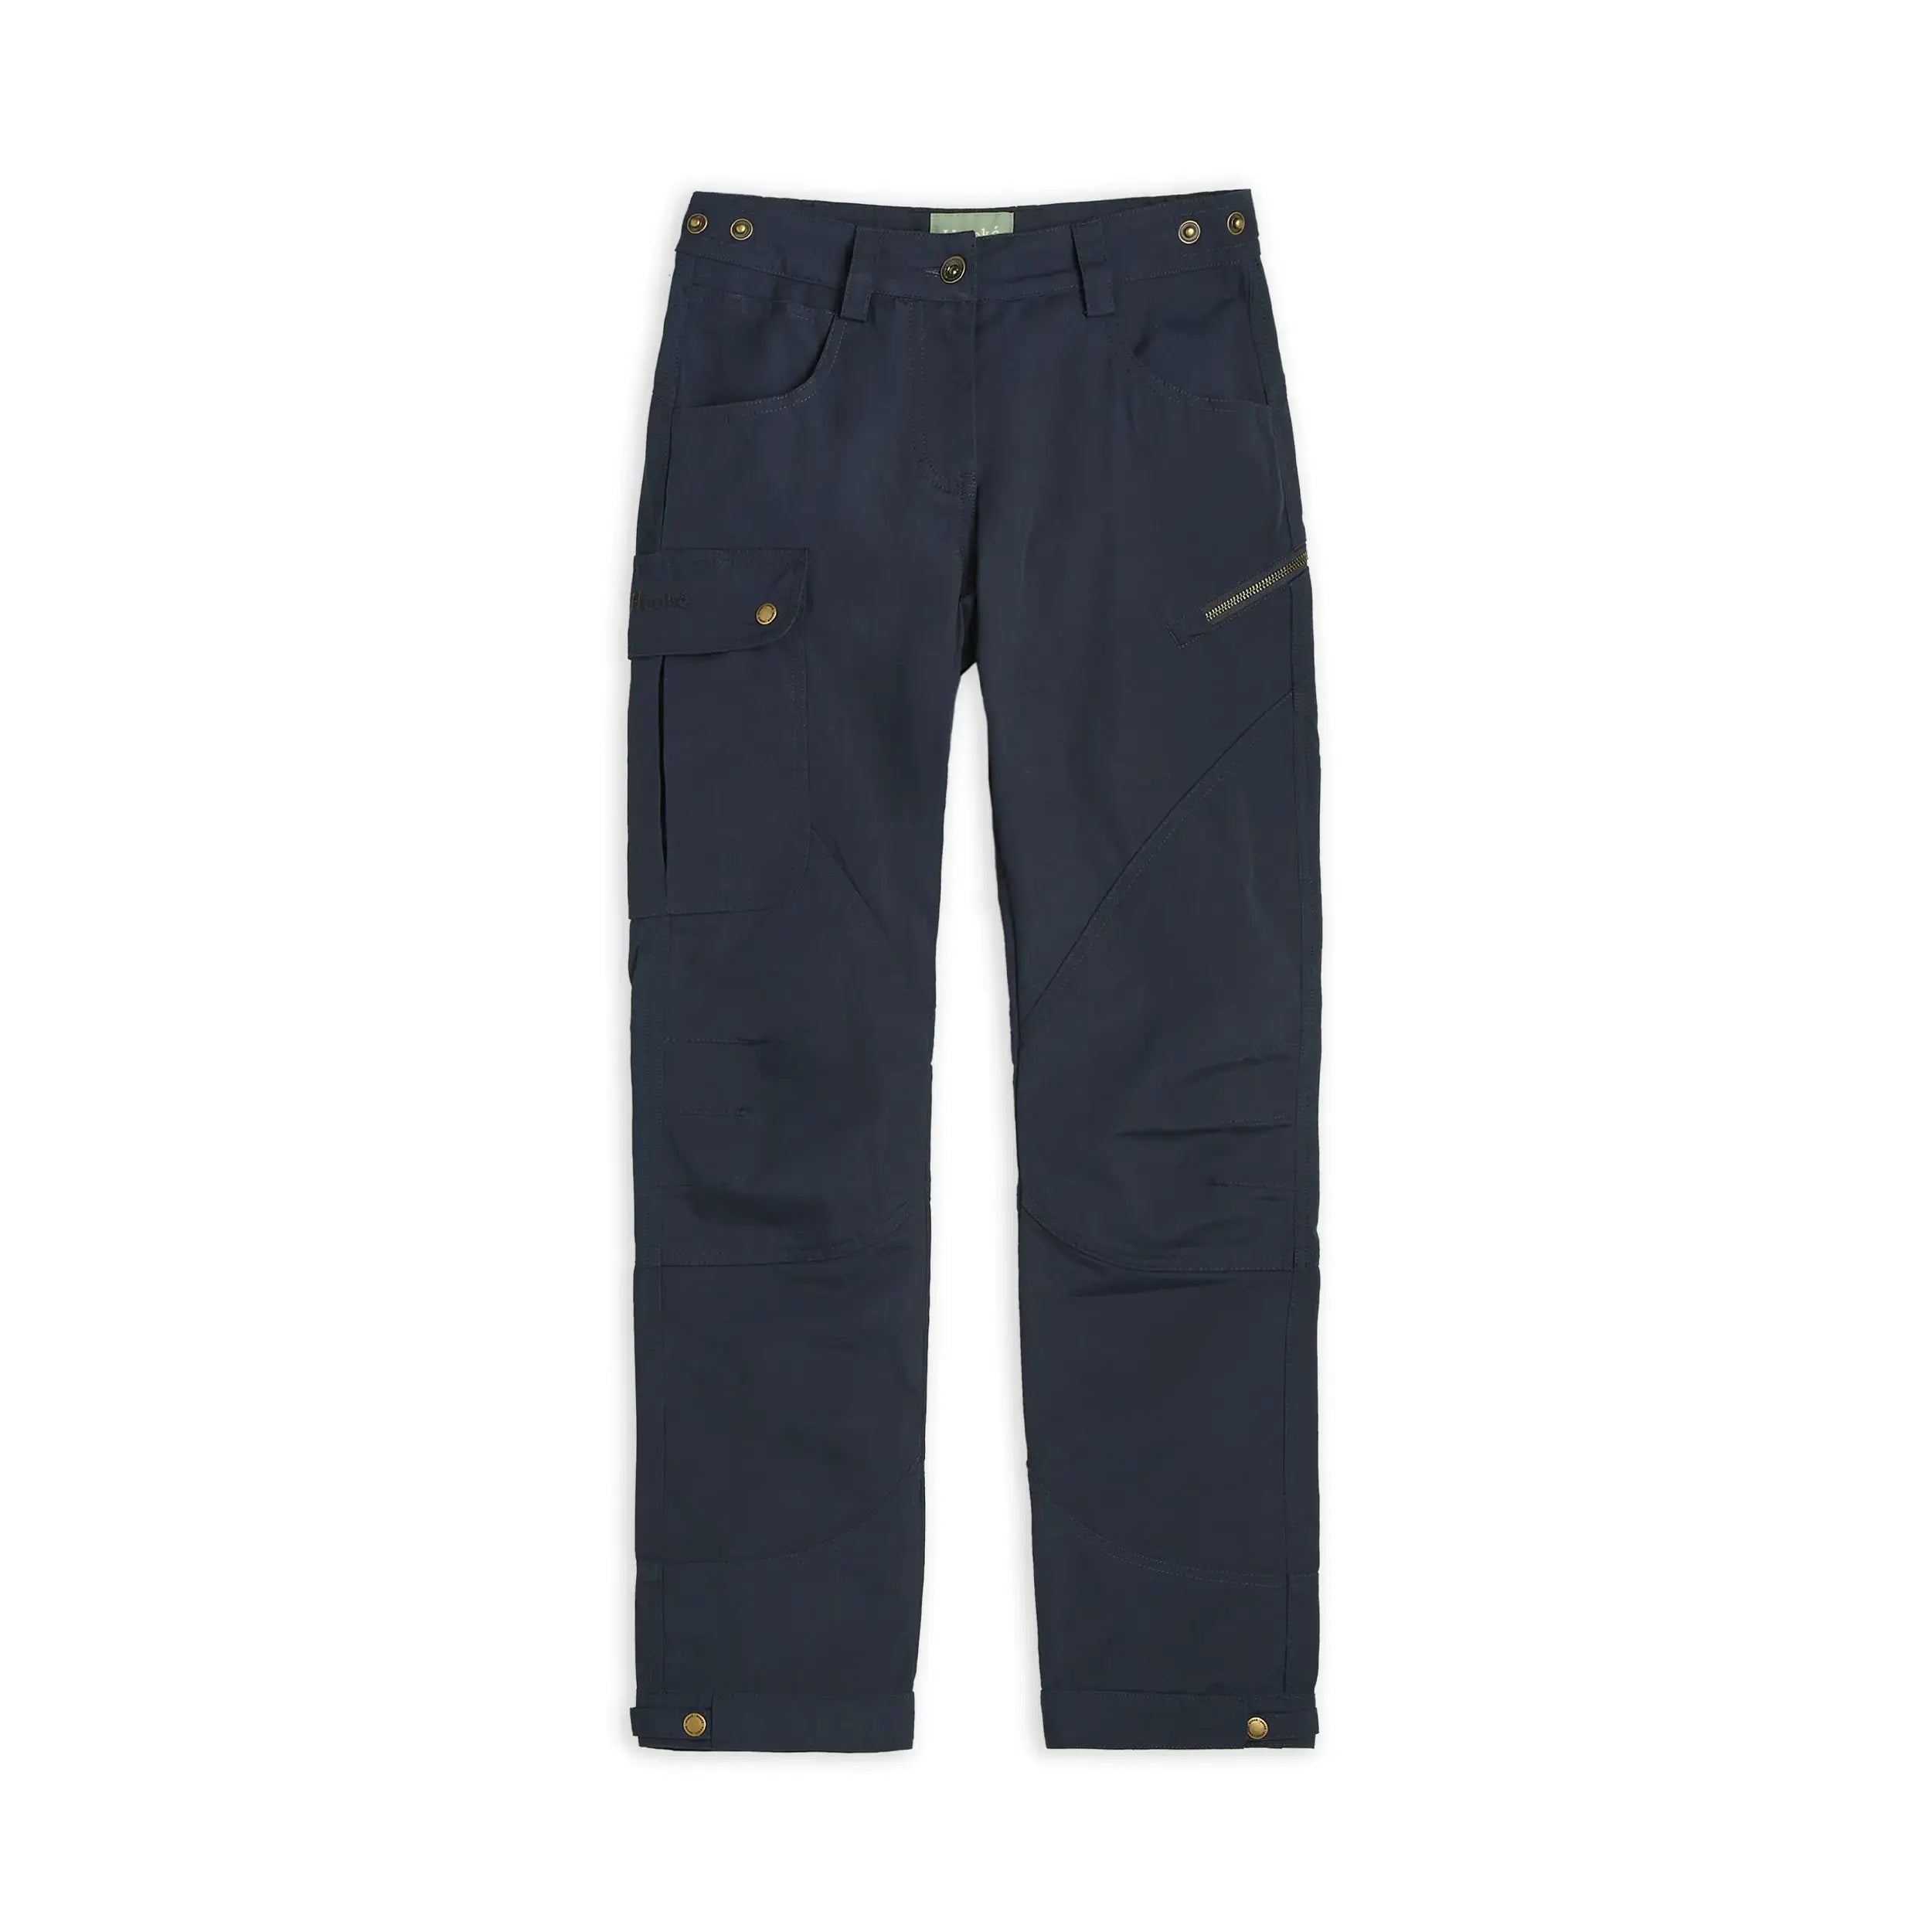 W's Offroad Pants - 25-26 / Navy